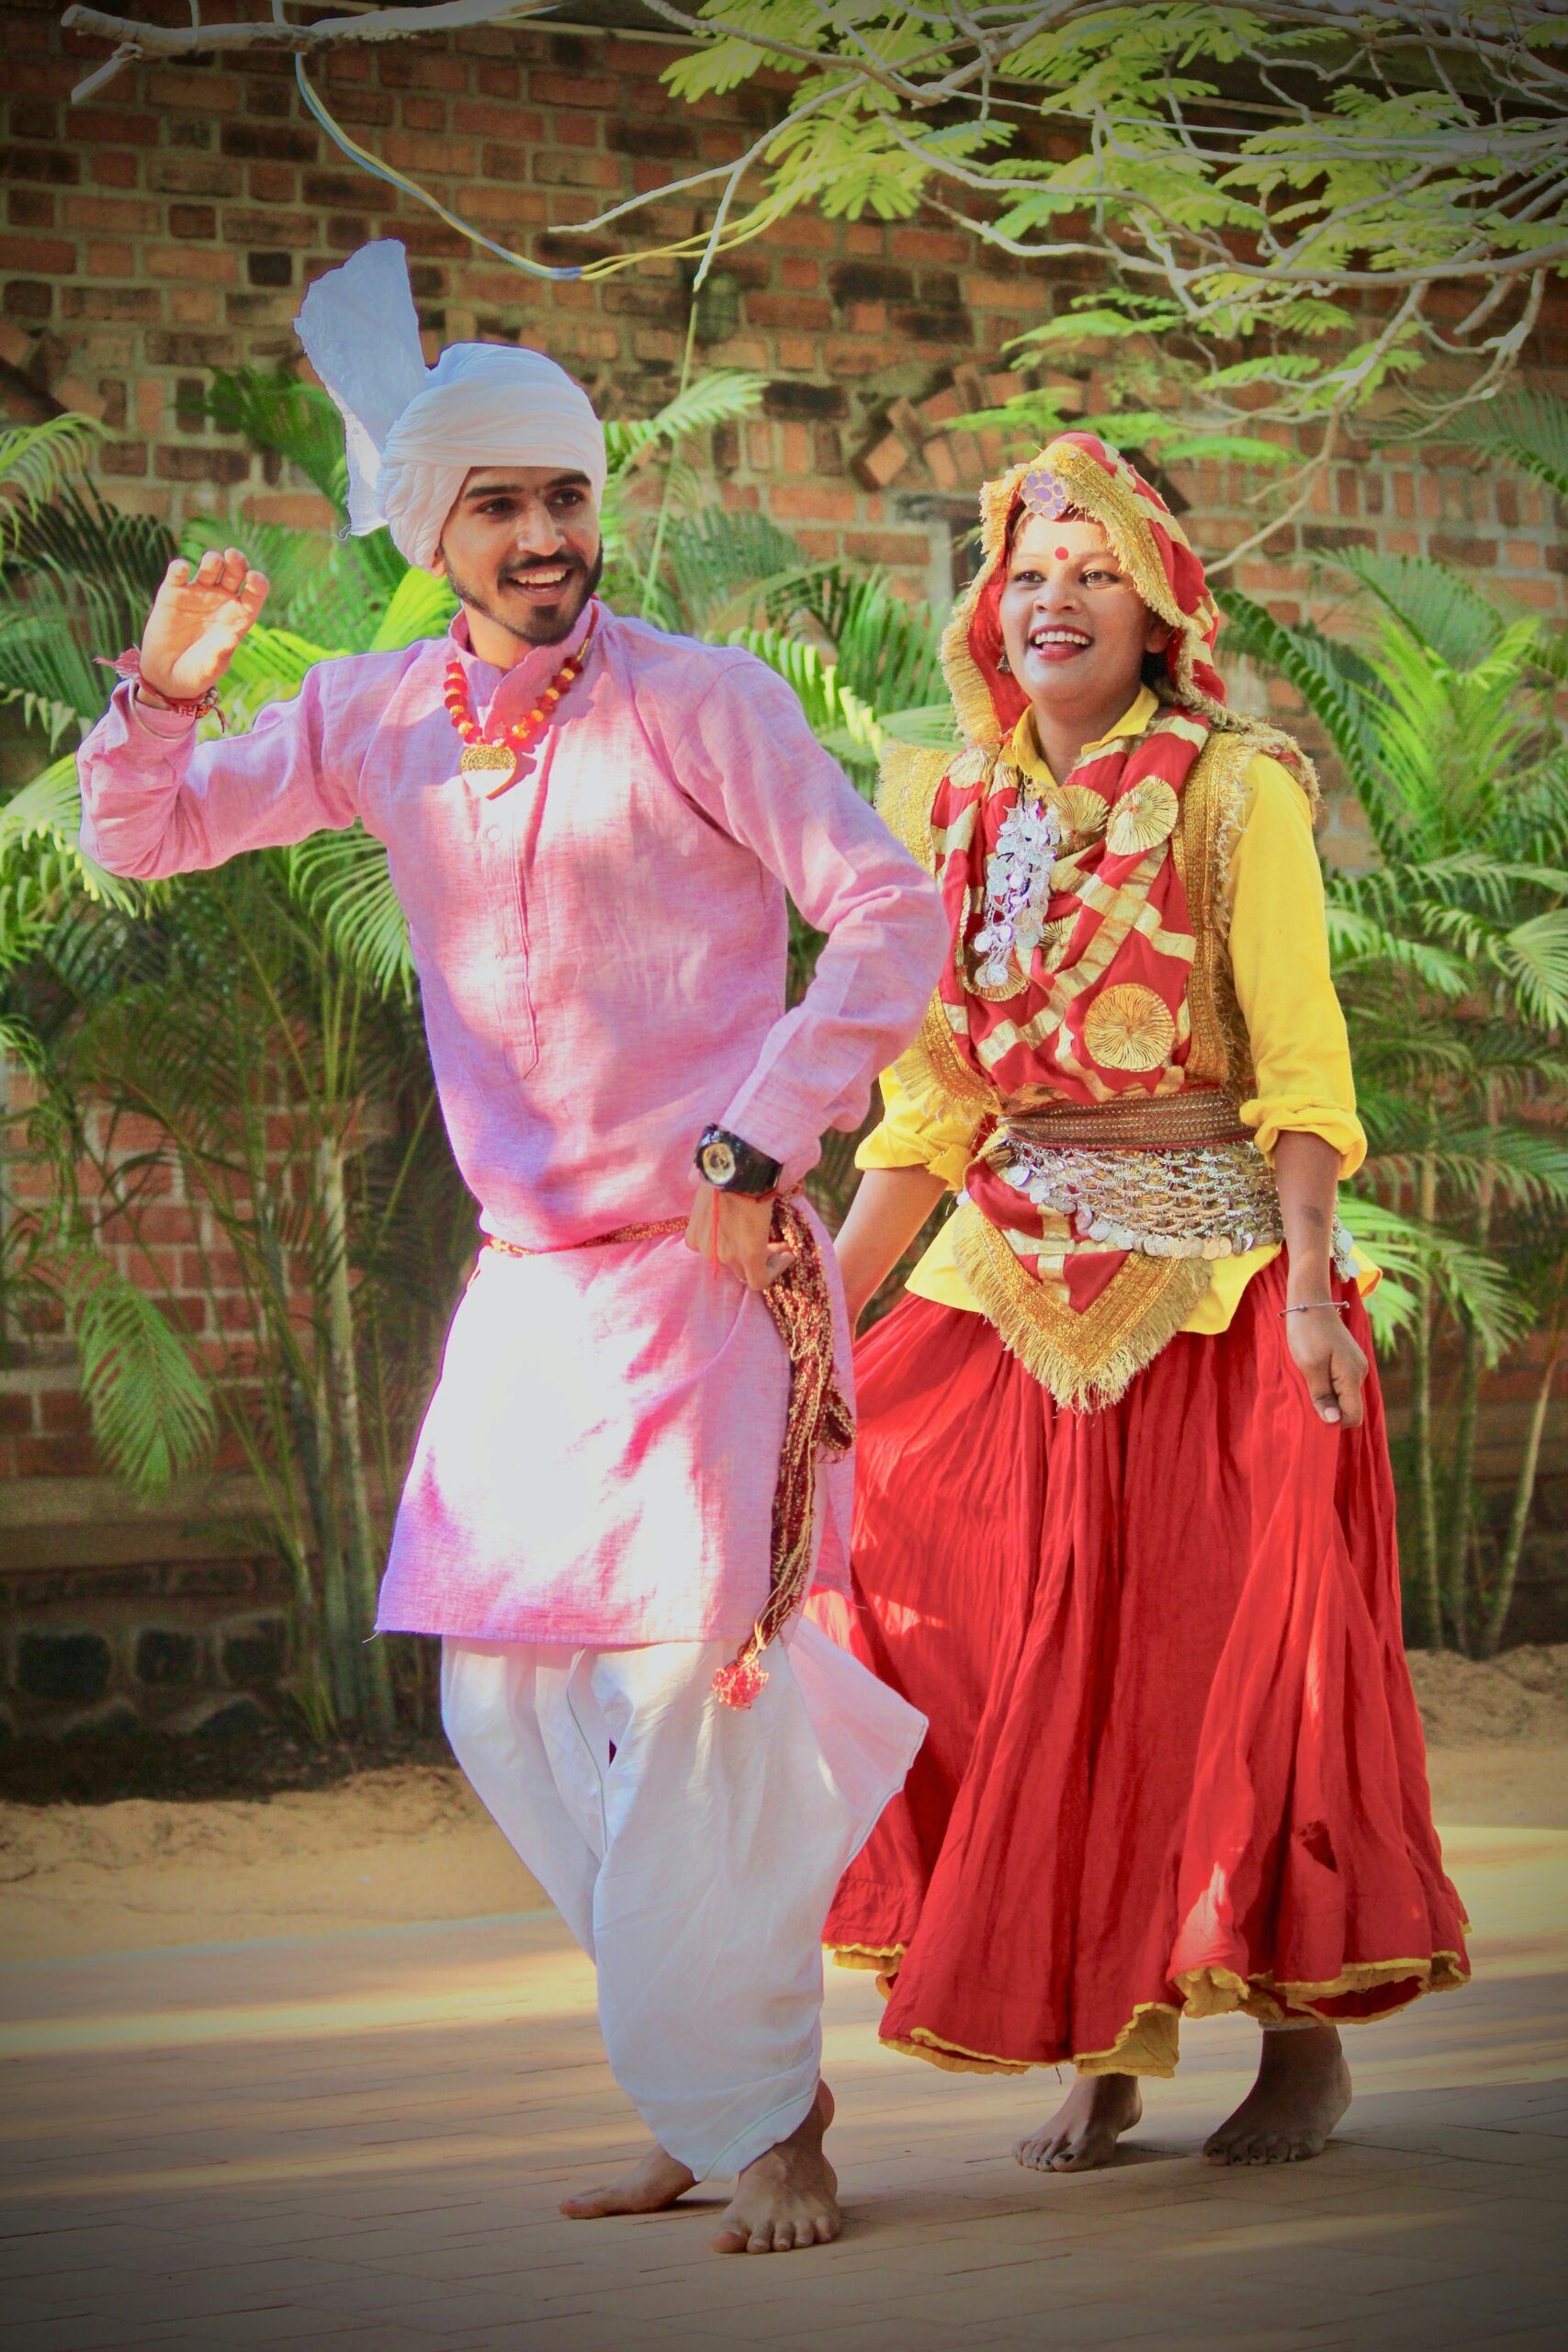 Couple dancing together in traditional folk style with bright cultural Indian costumes.